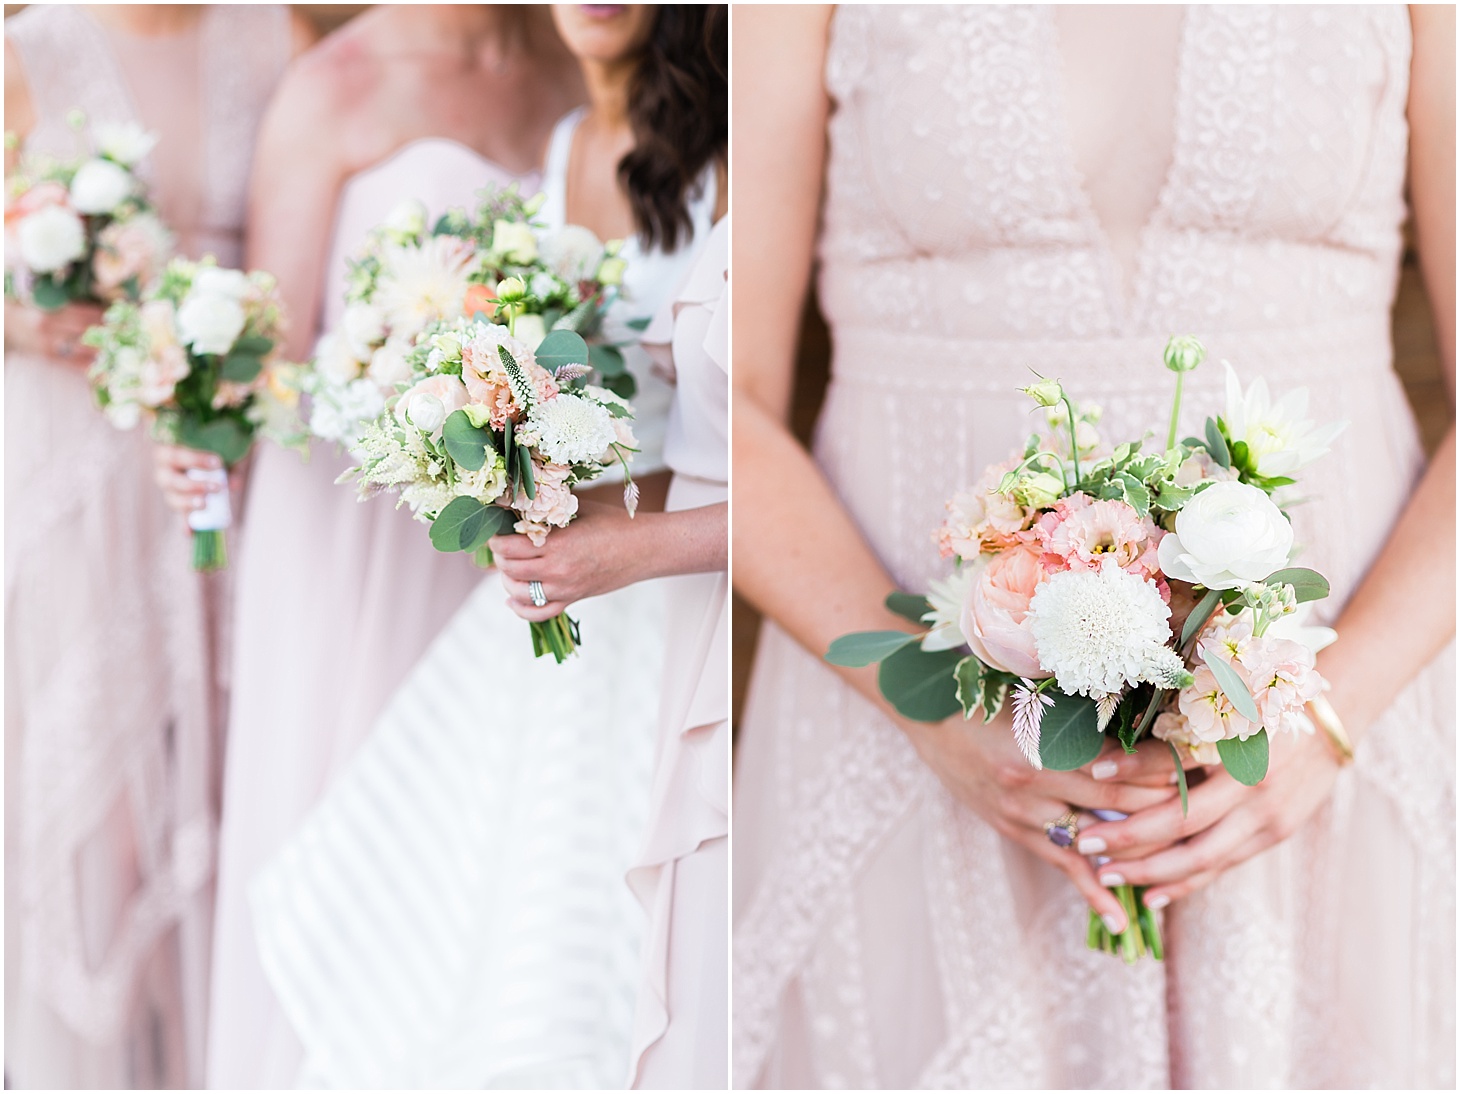 Bridal Party Portraits at District Winery | Love Blooms Bouquets | Chic and Modern Interfaith Wedding in Washington, DC | Sarah Bradshaw Photography